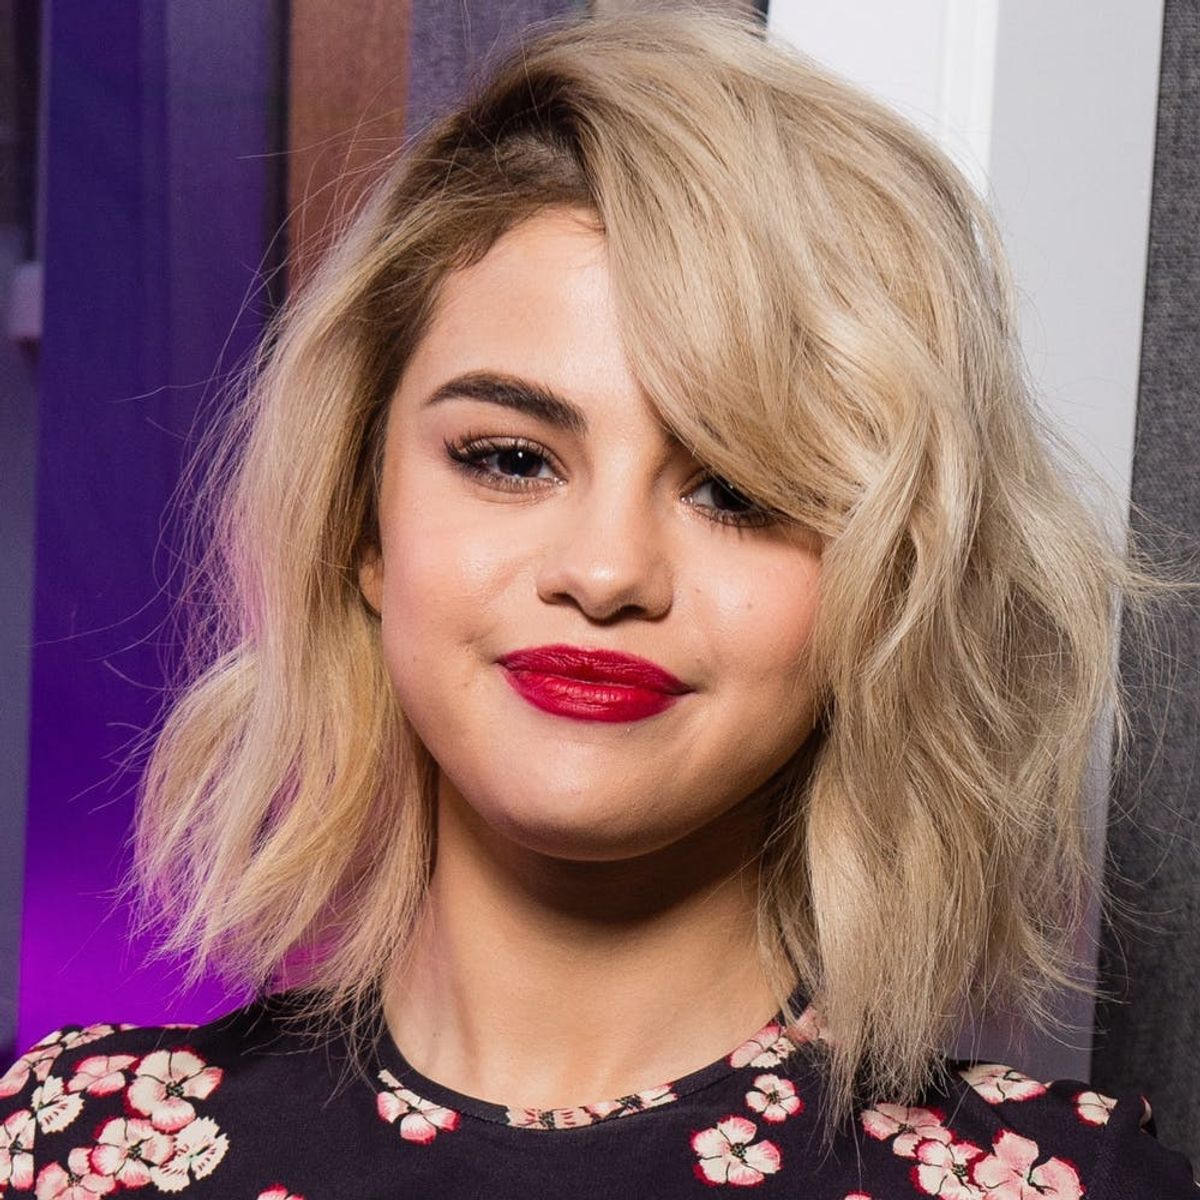 Selena Gomez Is Lending Her Vocal Talents to “The Voyage of Dr. Doolittle”